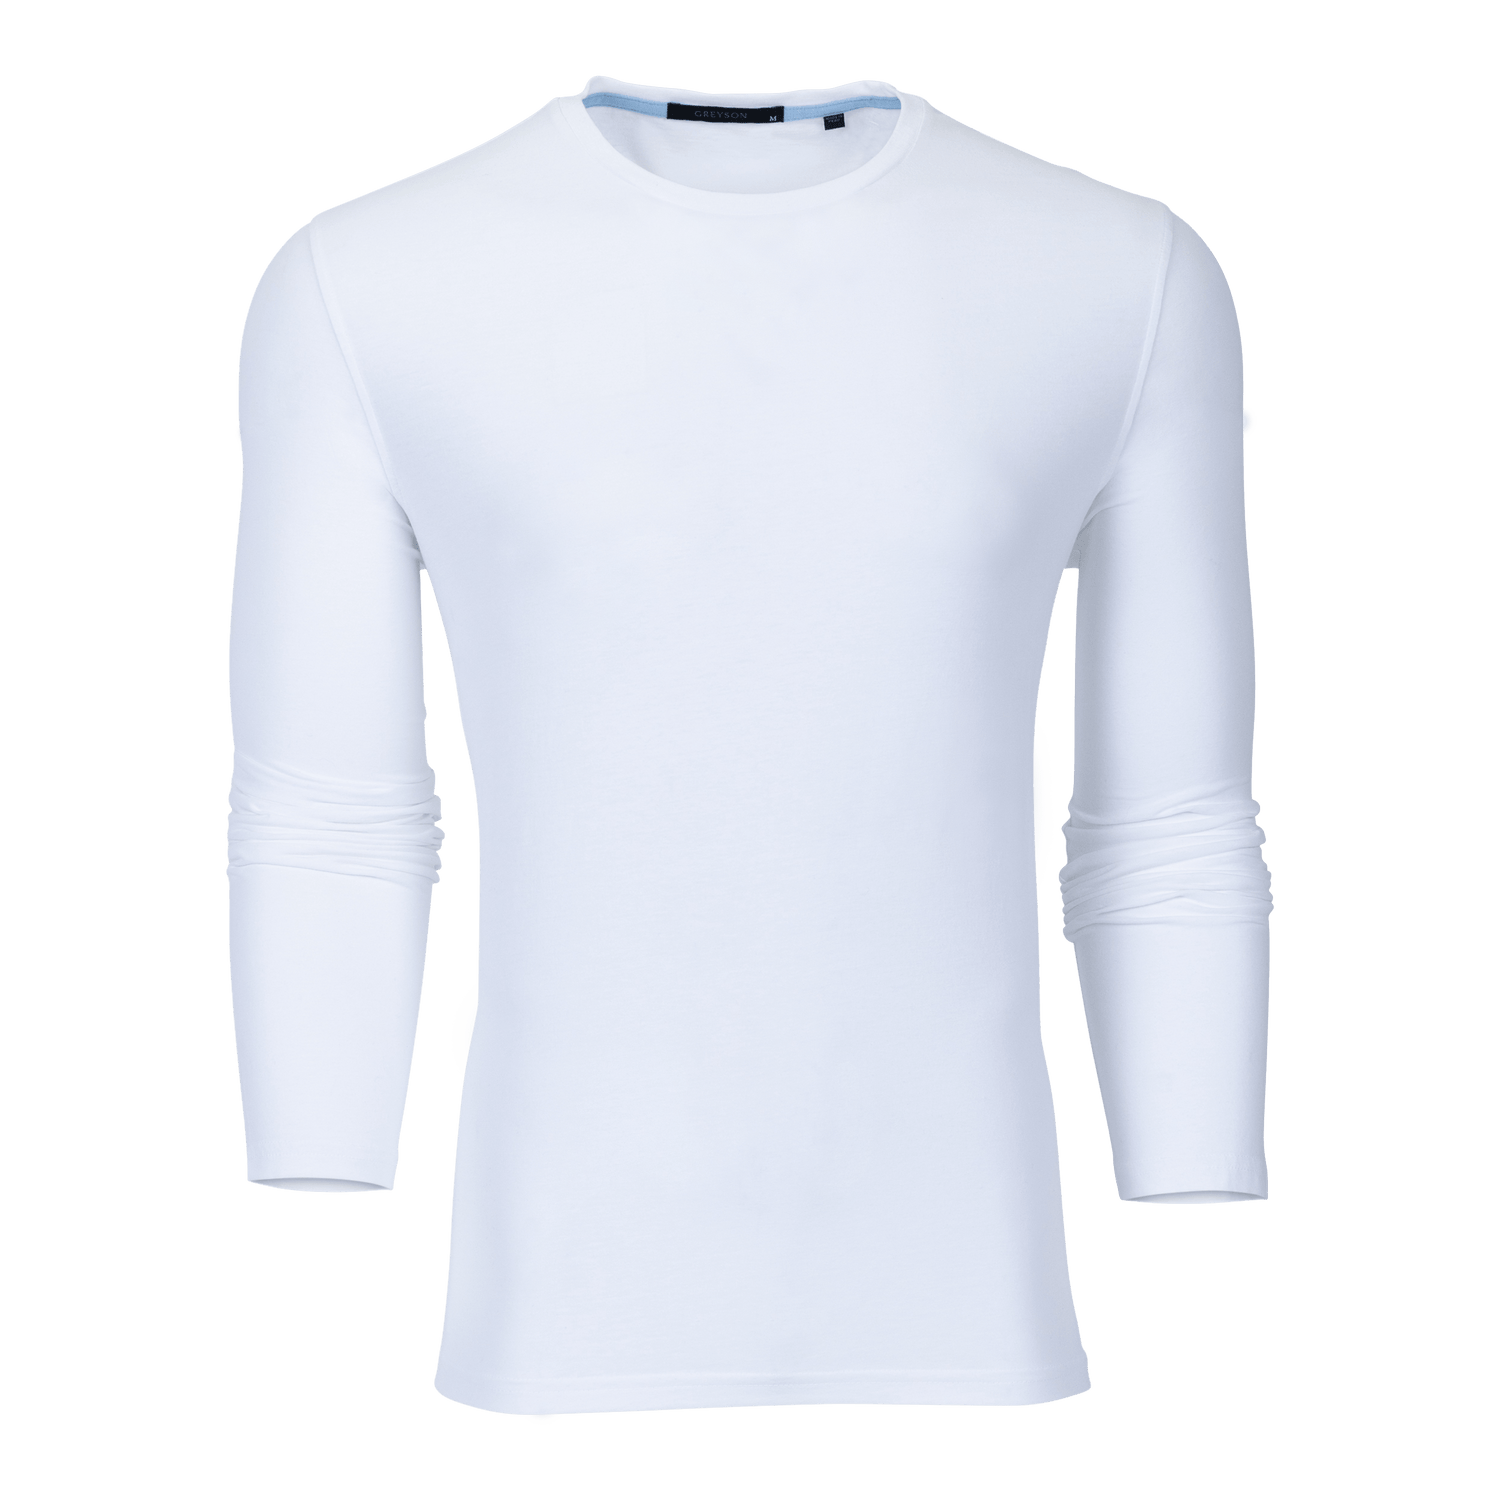 Spirit Long Sleeve Tee Child Products